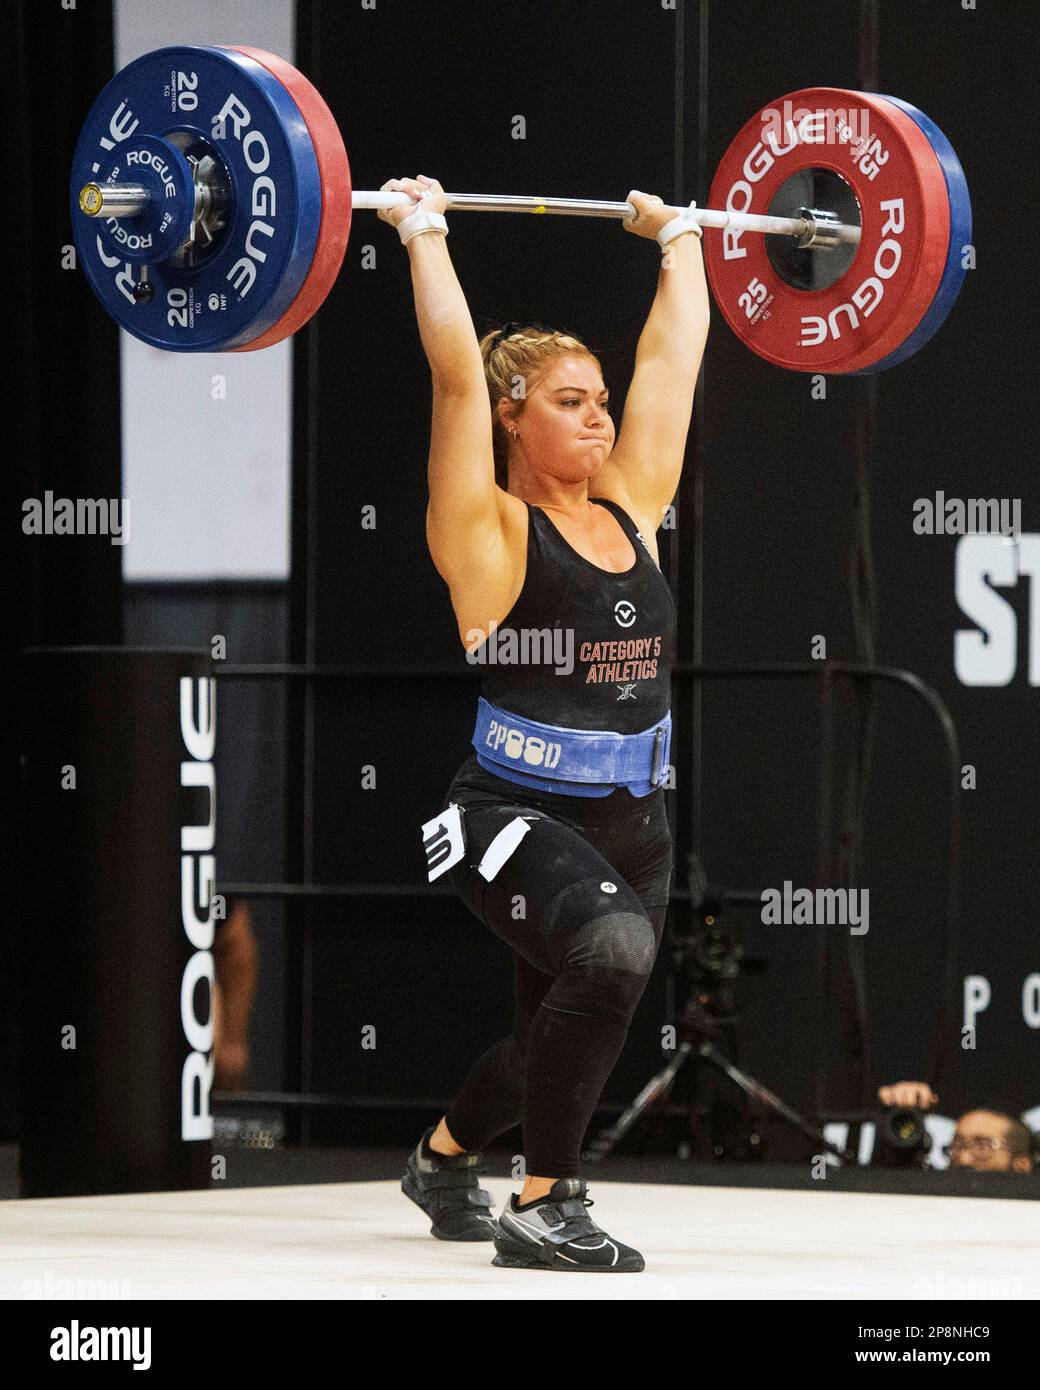 Columbus, Ohio, United States. 3th Mar, 2023. Alexia Gonzelez competes in the clean and jerk in the Women's 76kg category at the Rogue Stage in Columbus, Ohio, USA. Credit: Brent Clark/Alamy Live News Stock Photo